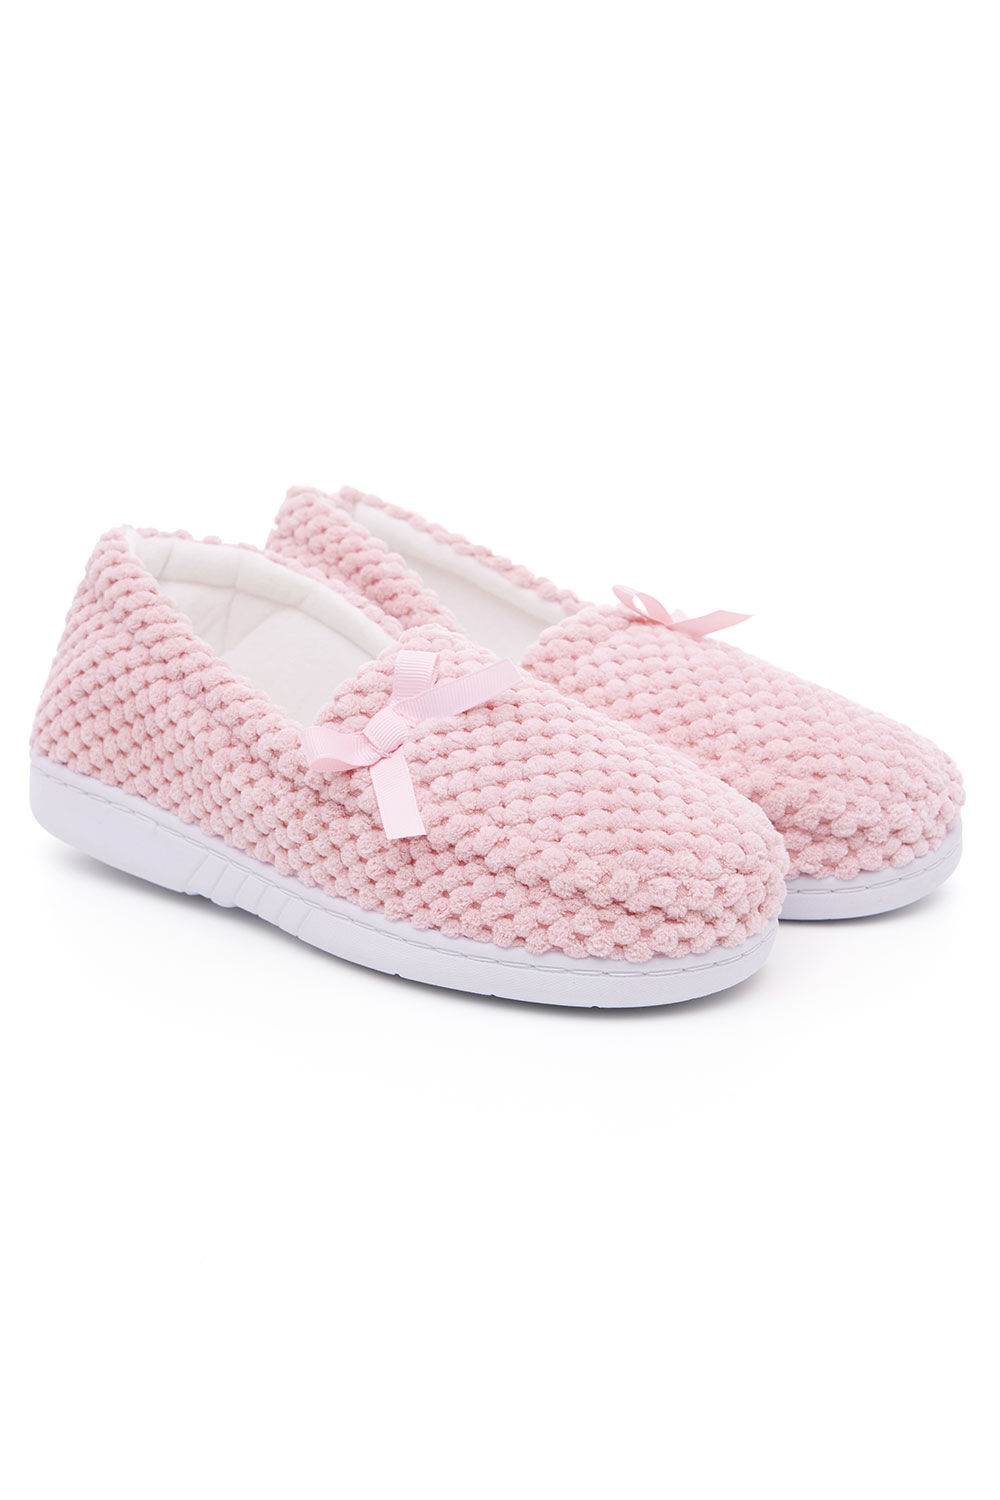 Bonmarche Pink Fleece Moccasin Slippers With Bow Detail, Size: 8